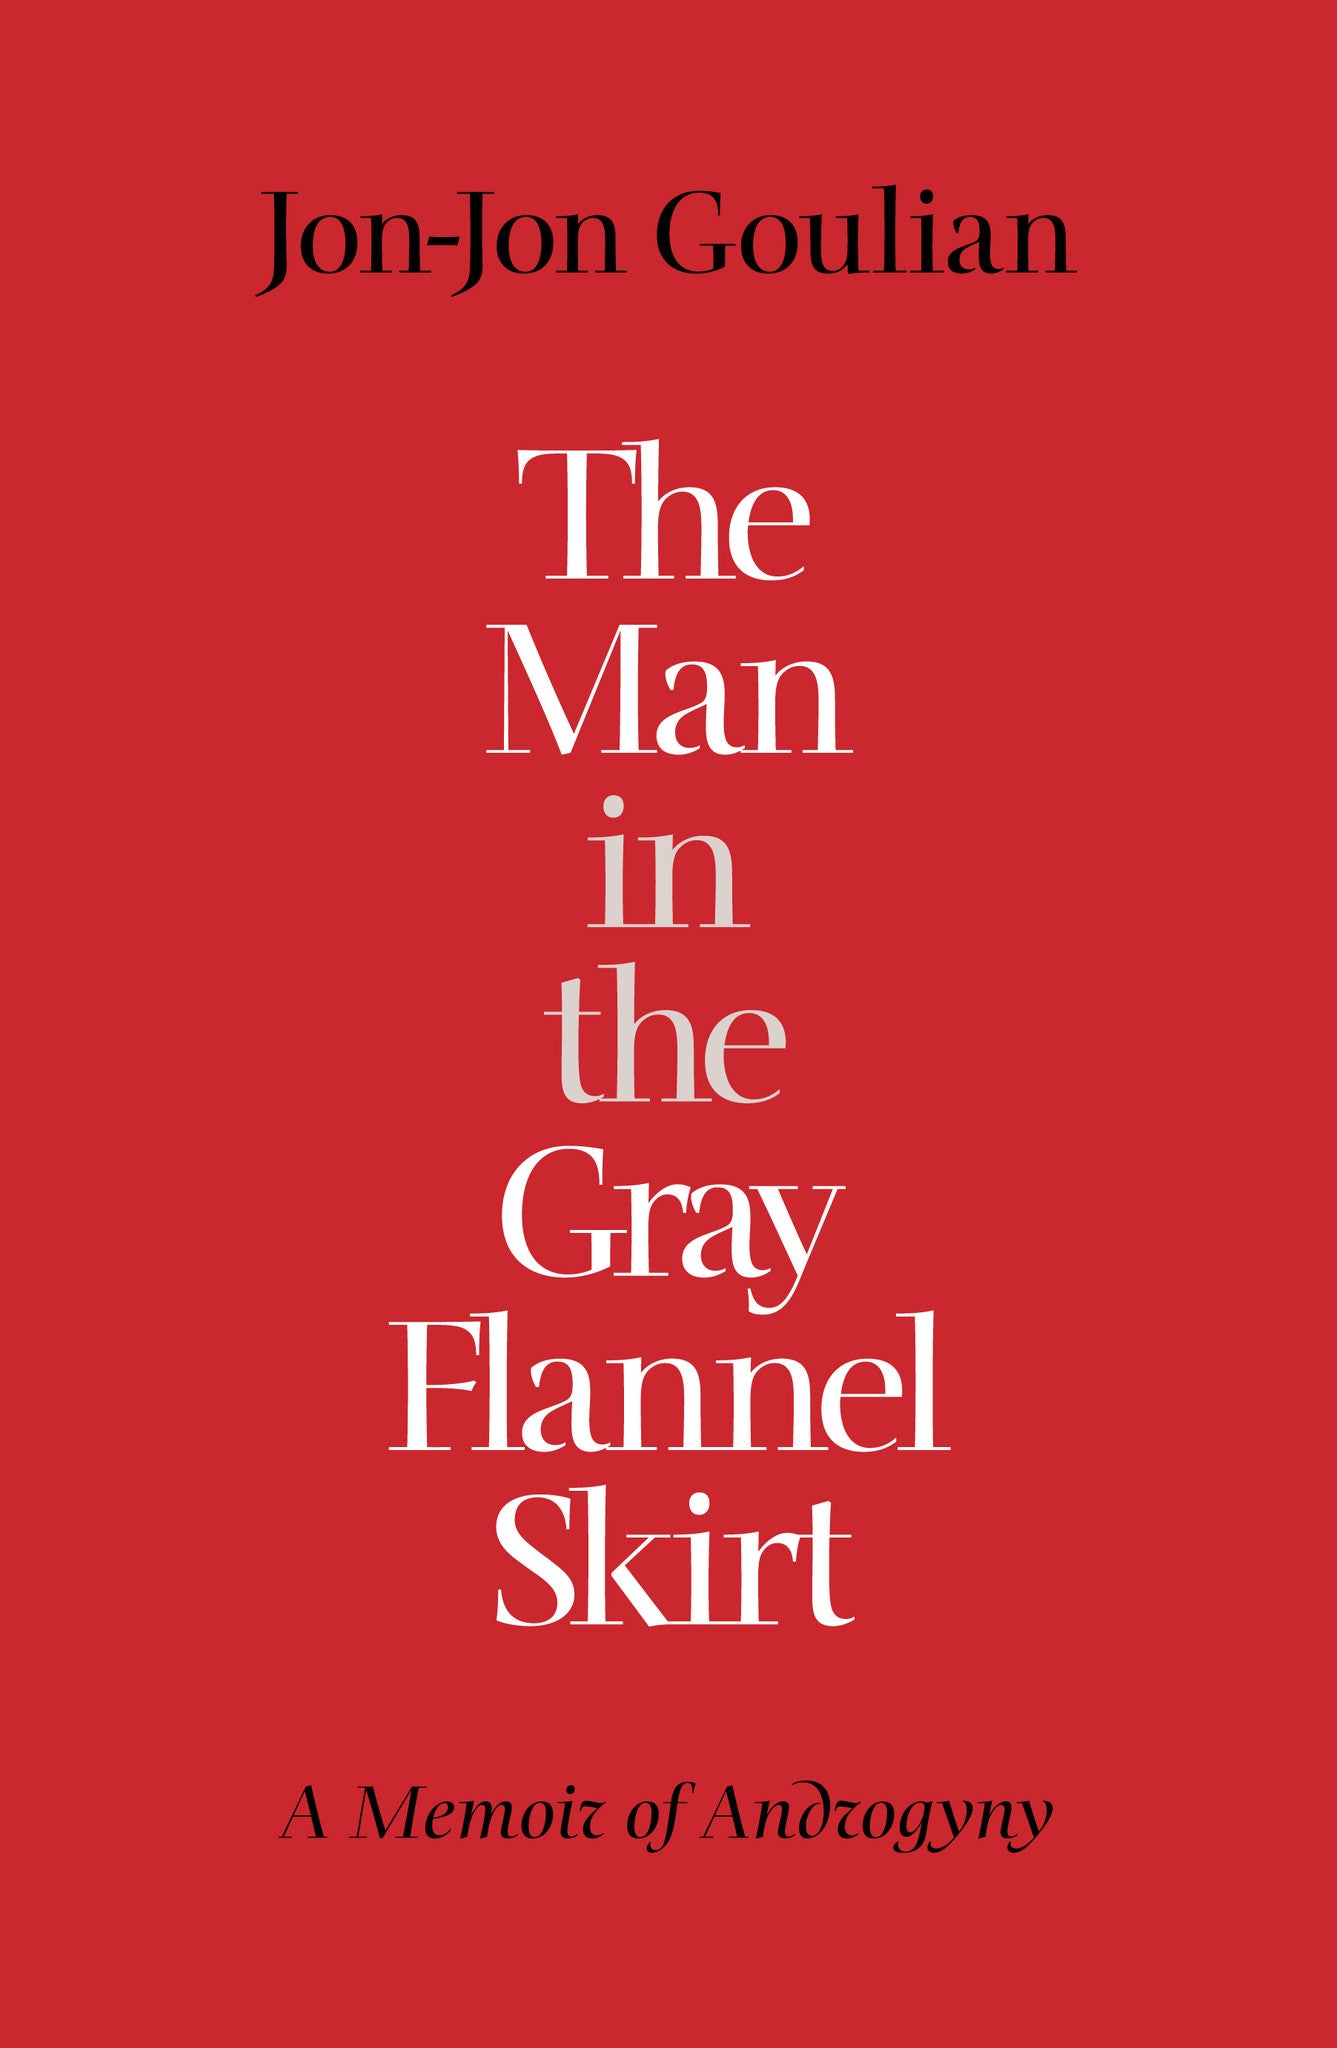 The Man in the Gray Flannel Skirt: A Memoir of Androgyny